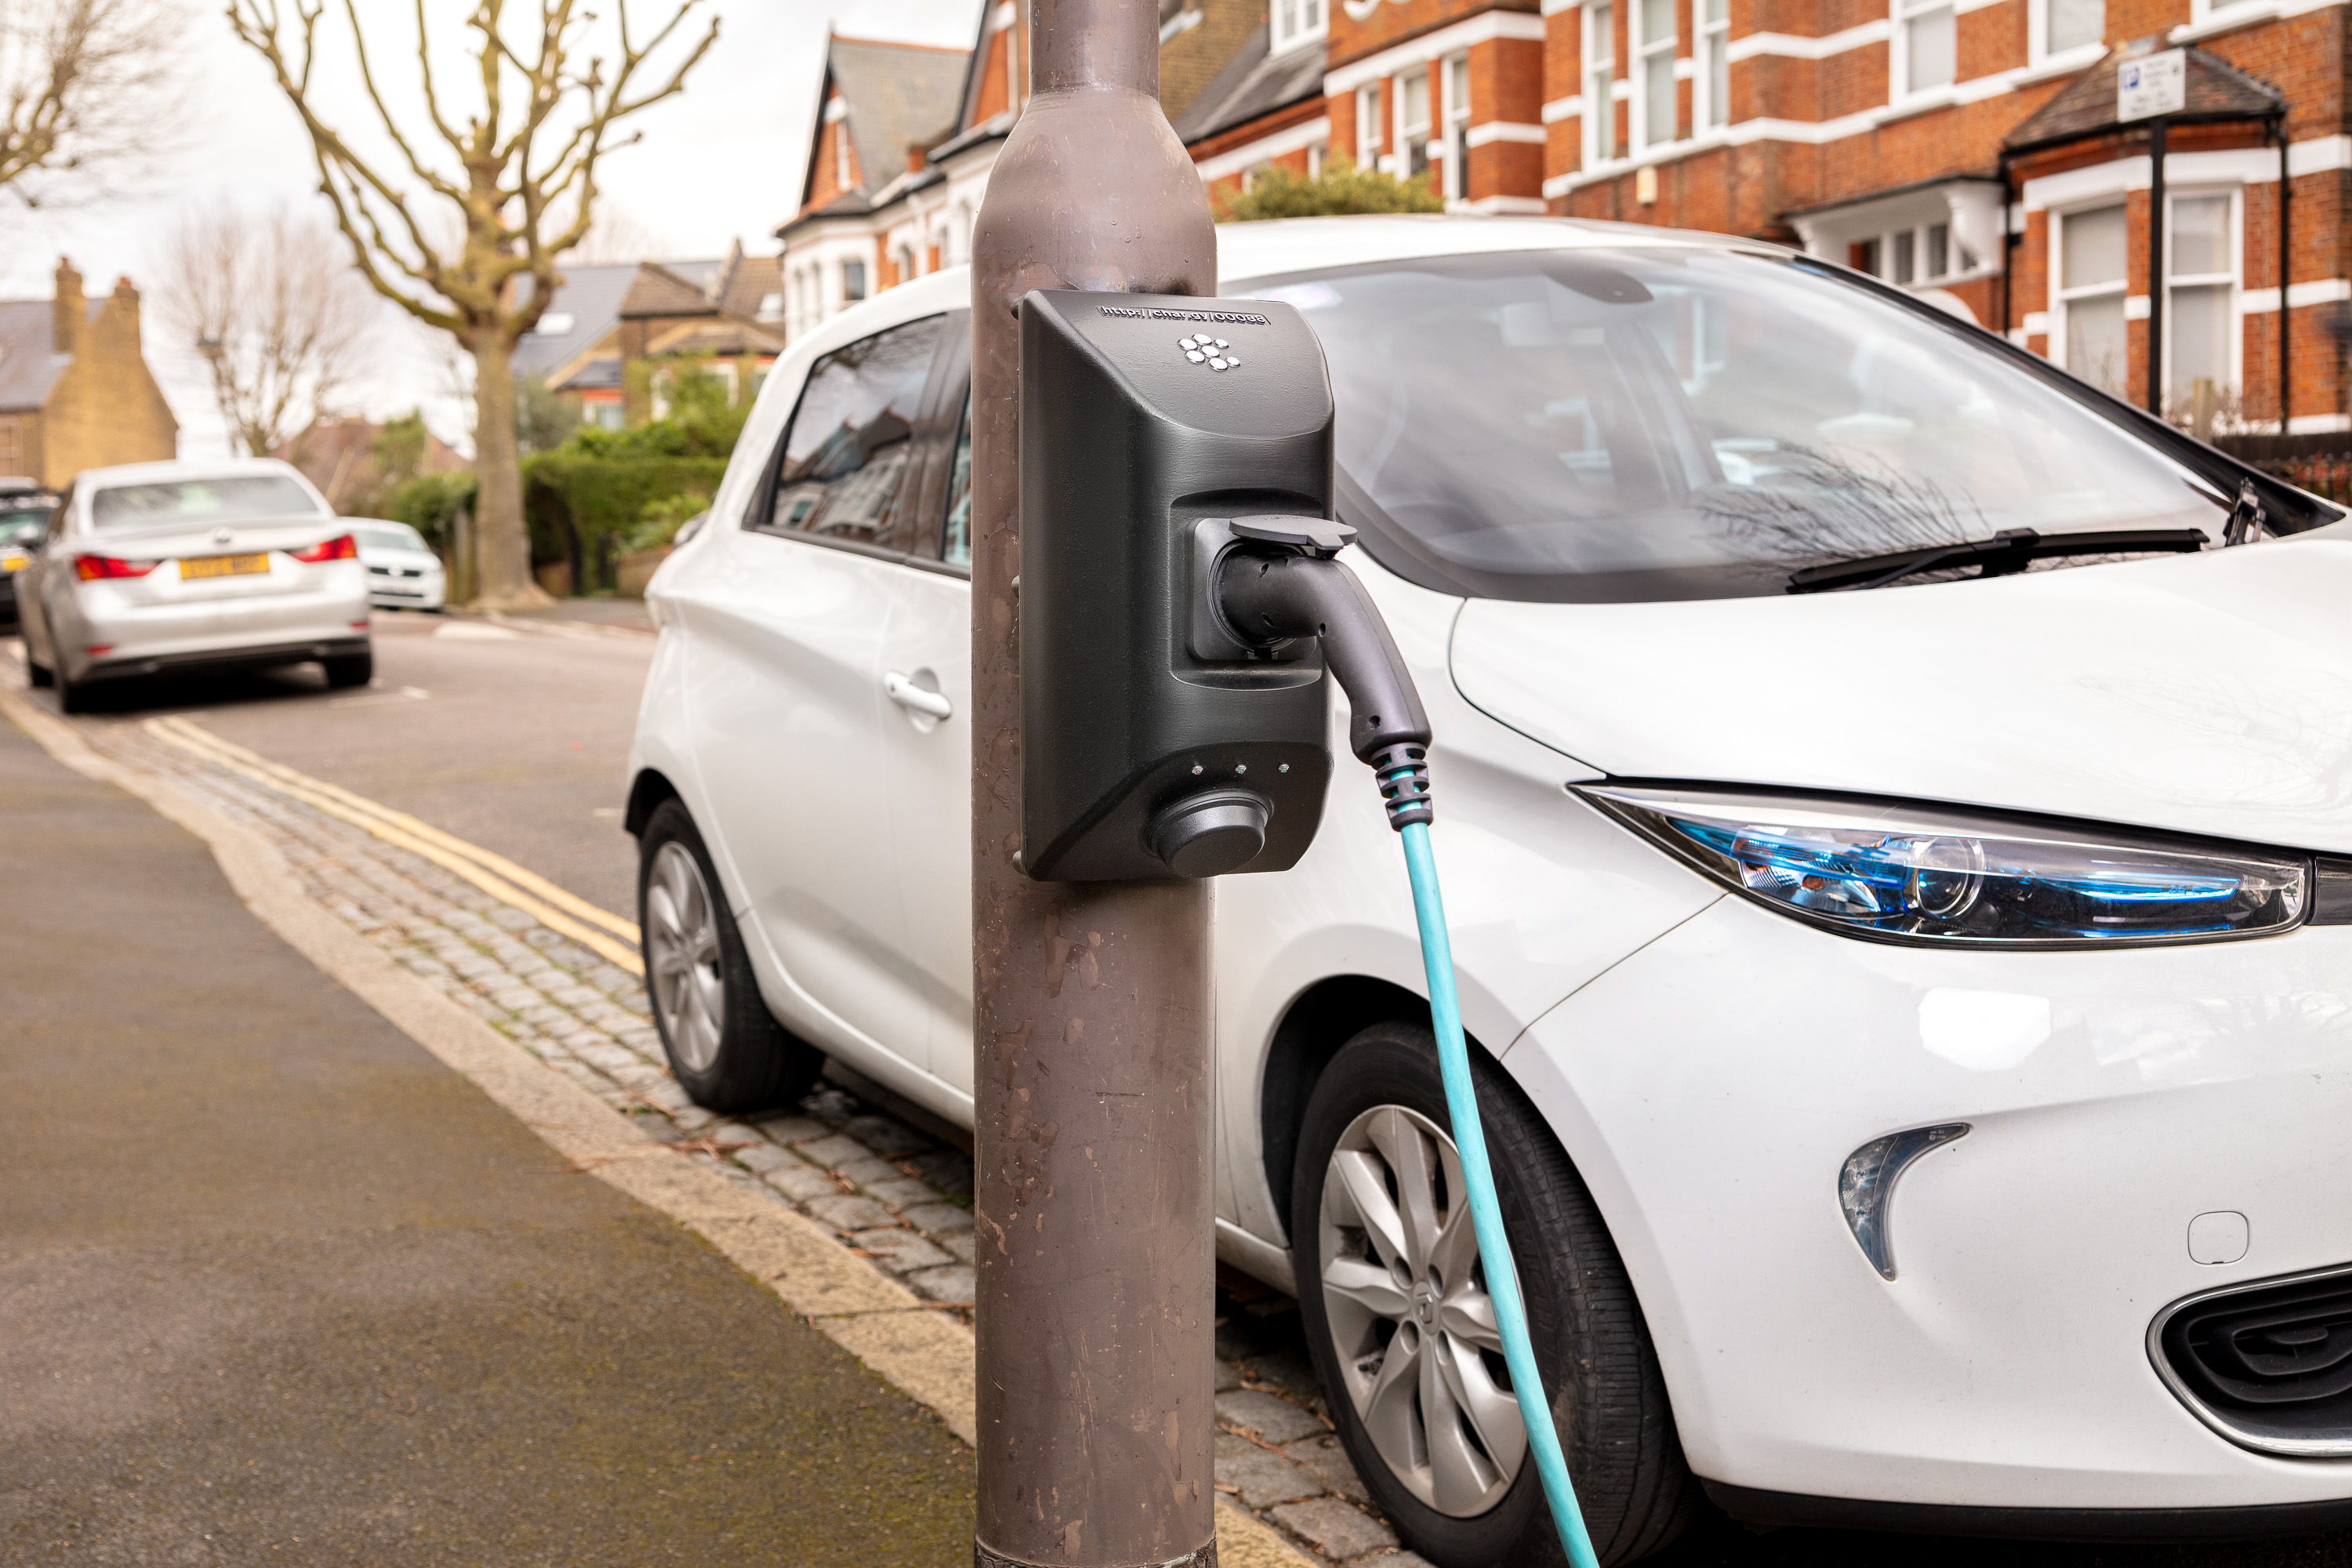 char.gy’s lamppost on-street charging points supply 100% renewable energy and provide a solution to city-dwelling EV owners who lack off-street parking.